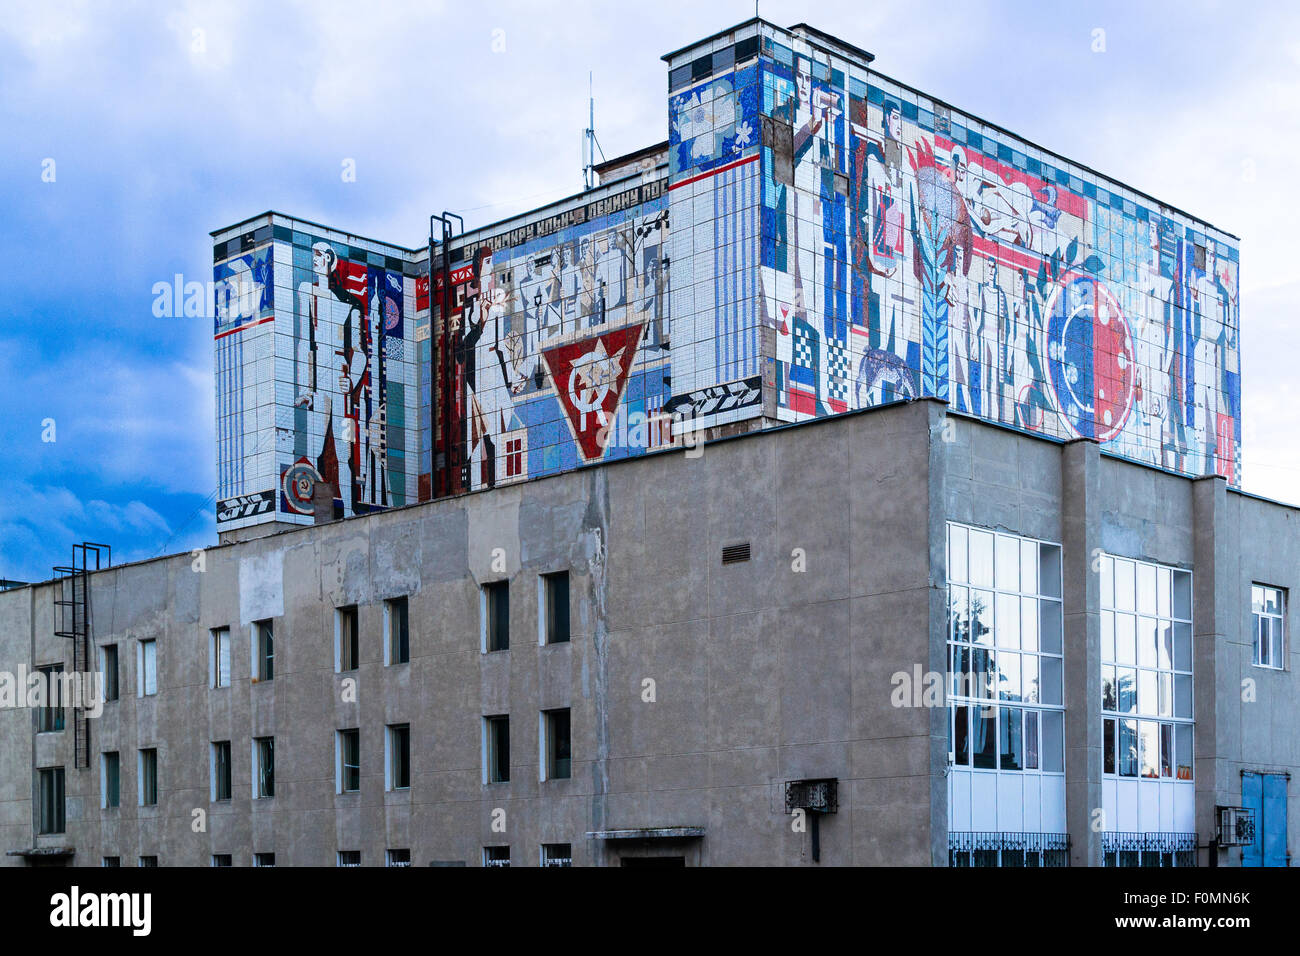 Old soviet era building mural in color created on the side of a block style building Stock Photo